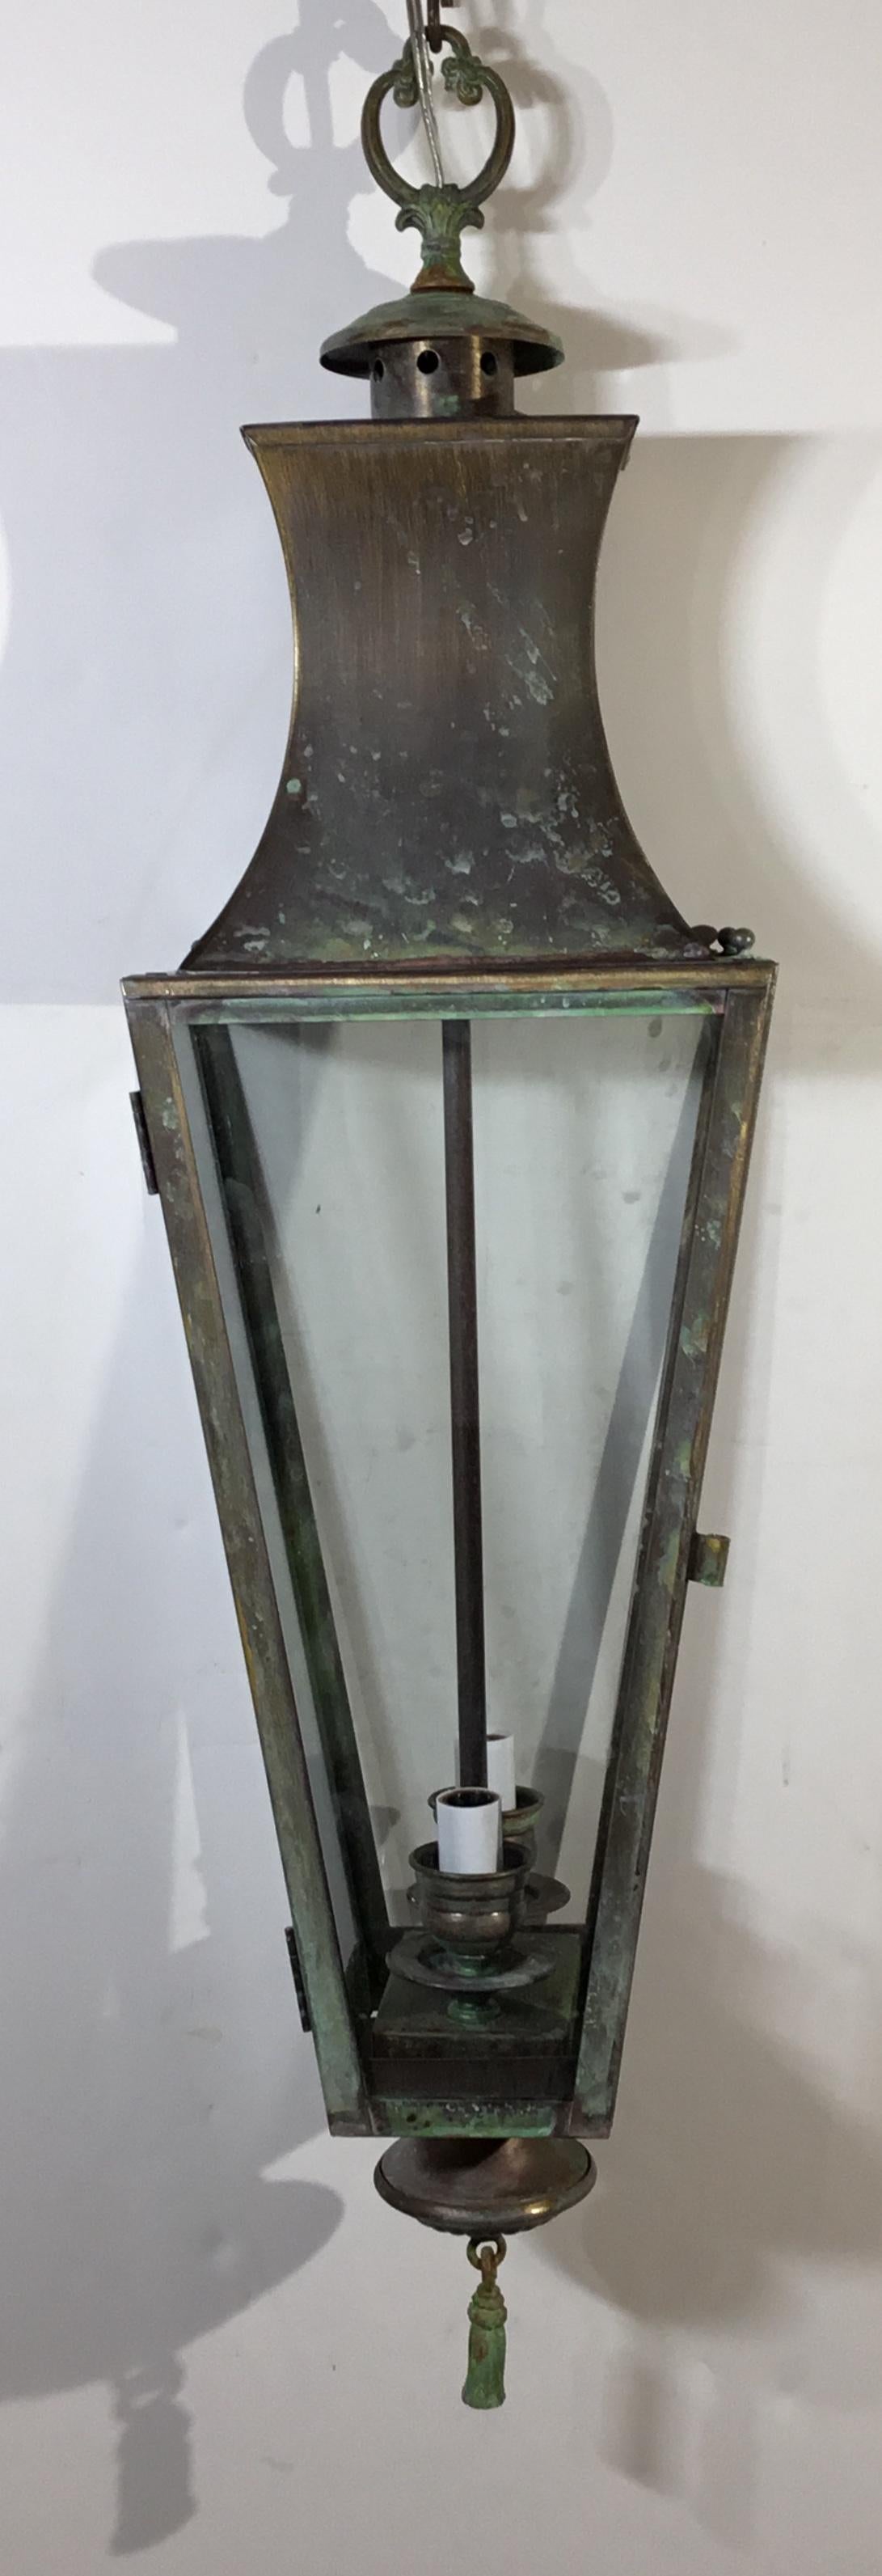 20th Century Handcrafted Solid Brass Ceiling Lantern